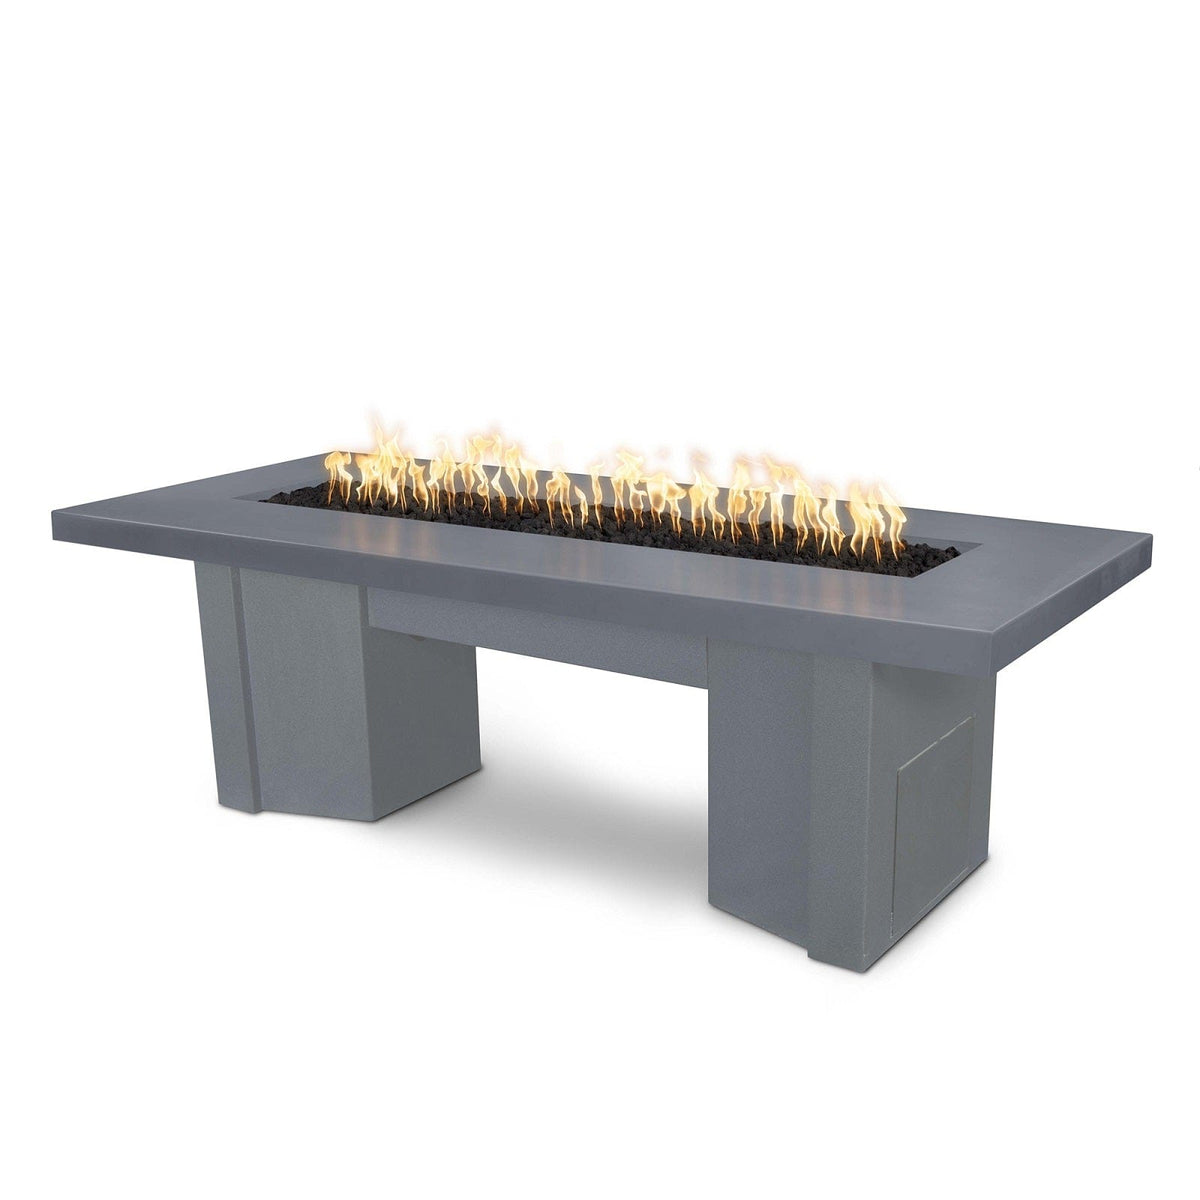 The Outdoor Plus Fire Features Gray (-GRY) / Gray Powder Coated Steel (-GRY) The Outdoor Plus 60&quot; Alameda Fire Table Smooth Concrete in Natural Gas - 12V Electronic Ignition / OPT-ALMGFRC60E12V-NG